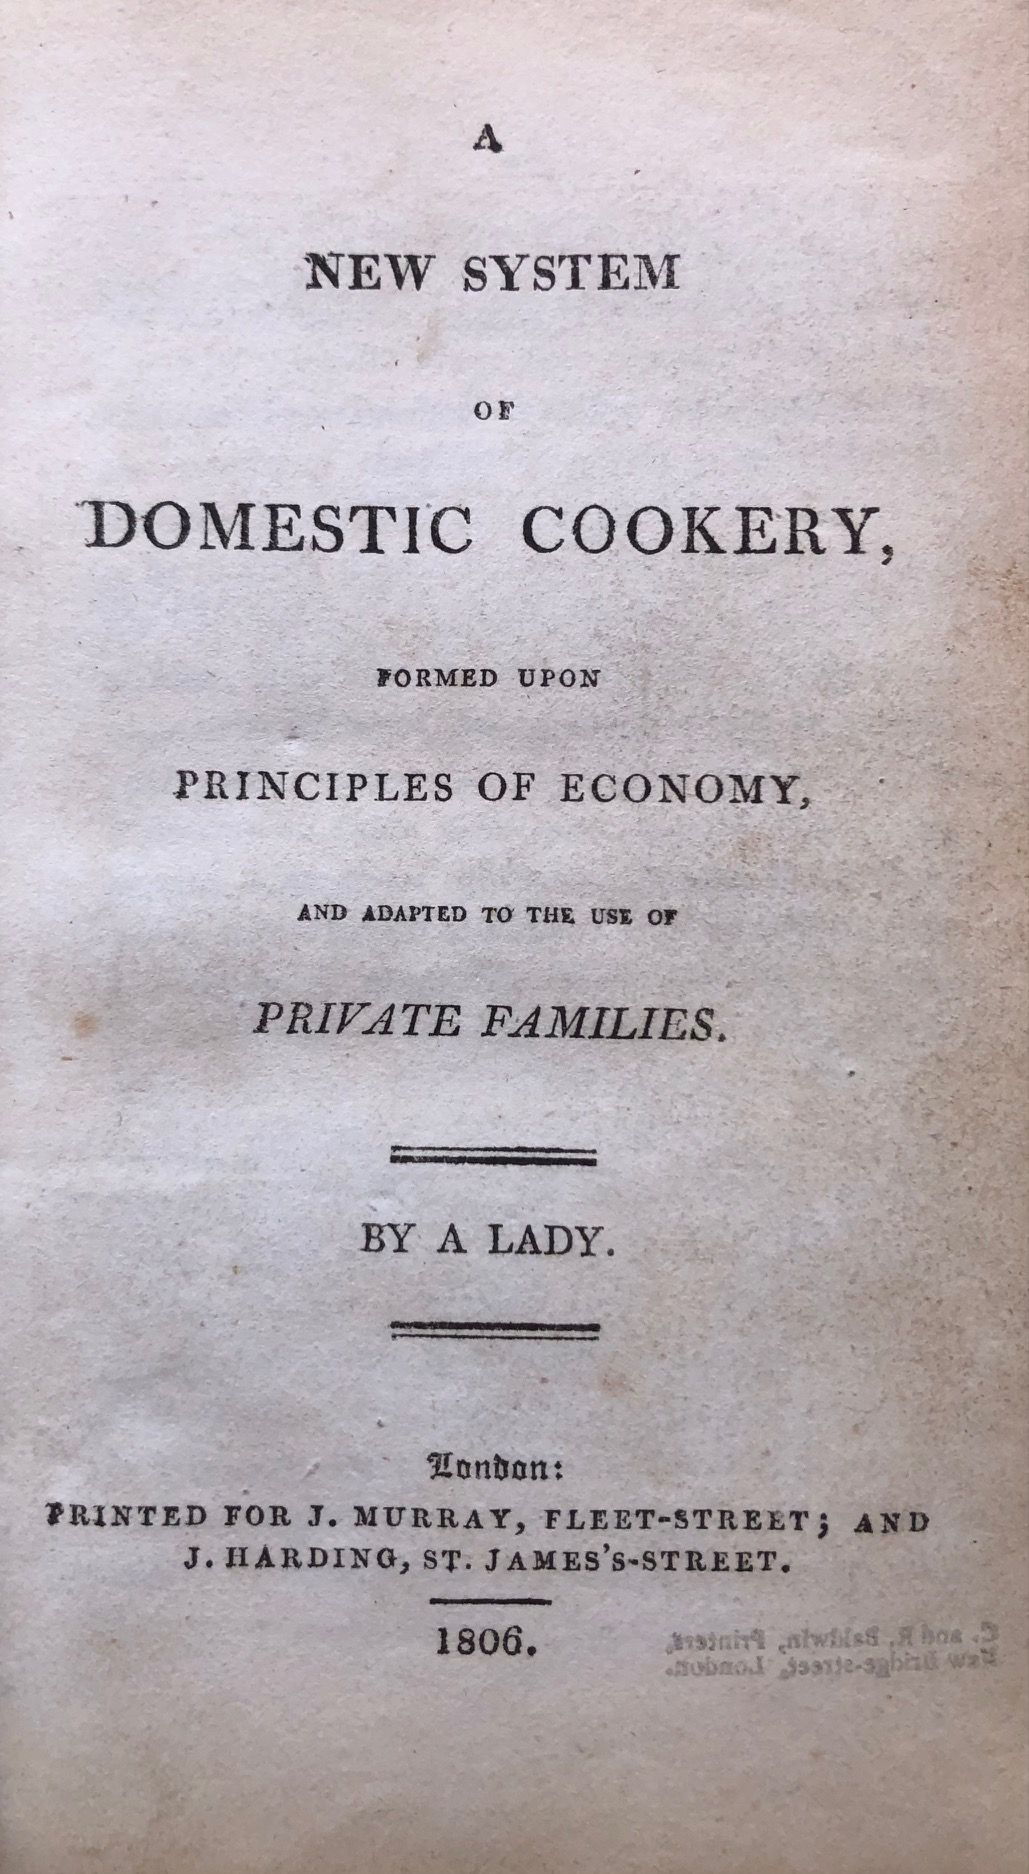 [Rundell, Maria Eliza Ketelby]. A New System of Domestic Cookery; formed upon Principles of Economy and adapted to the use of Private Families.